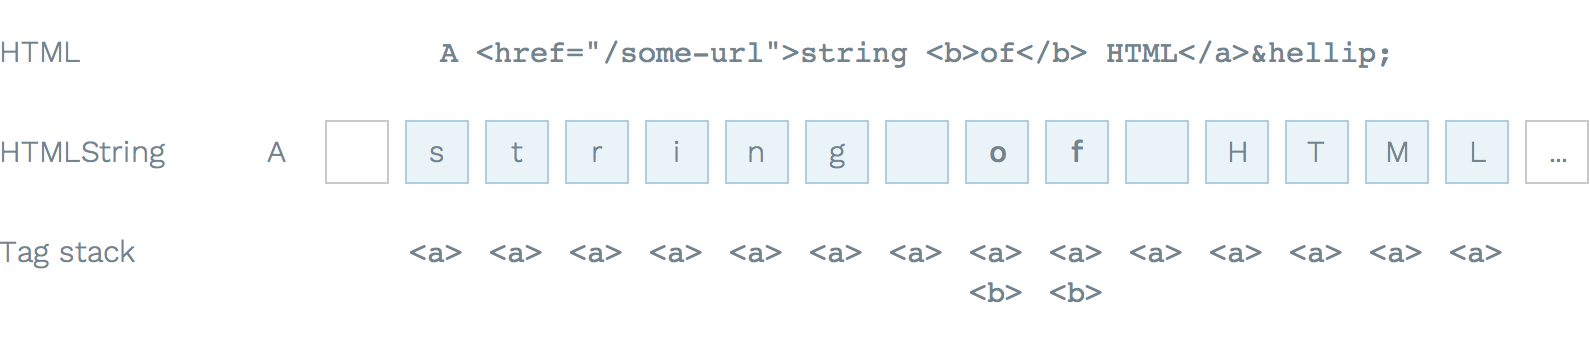 Structure of a HTML string